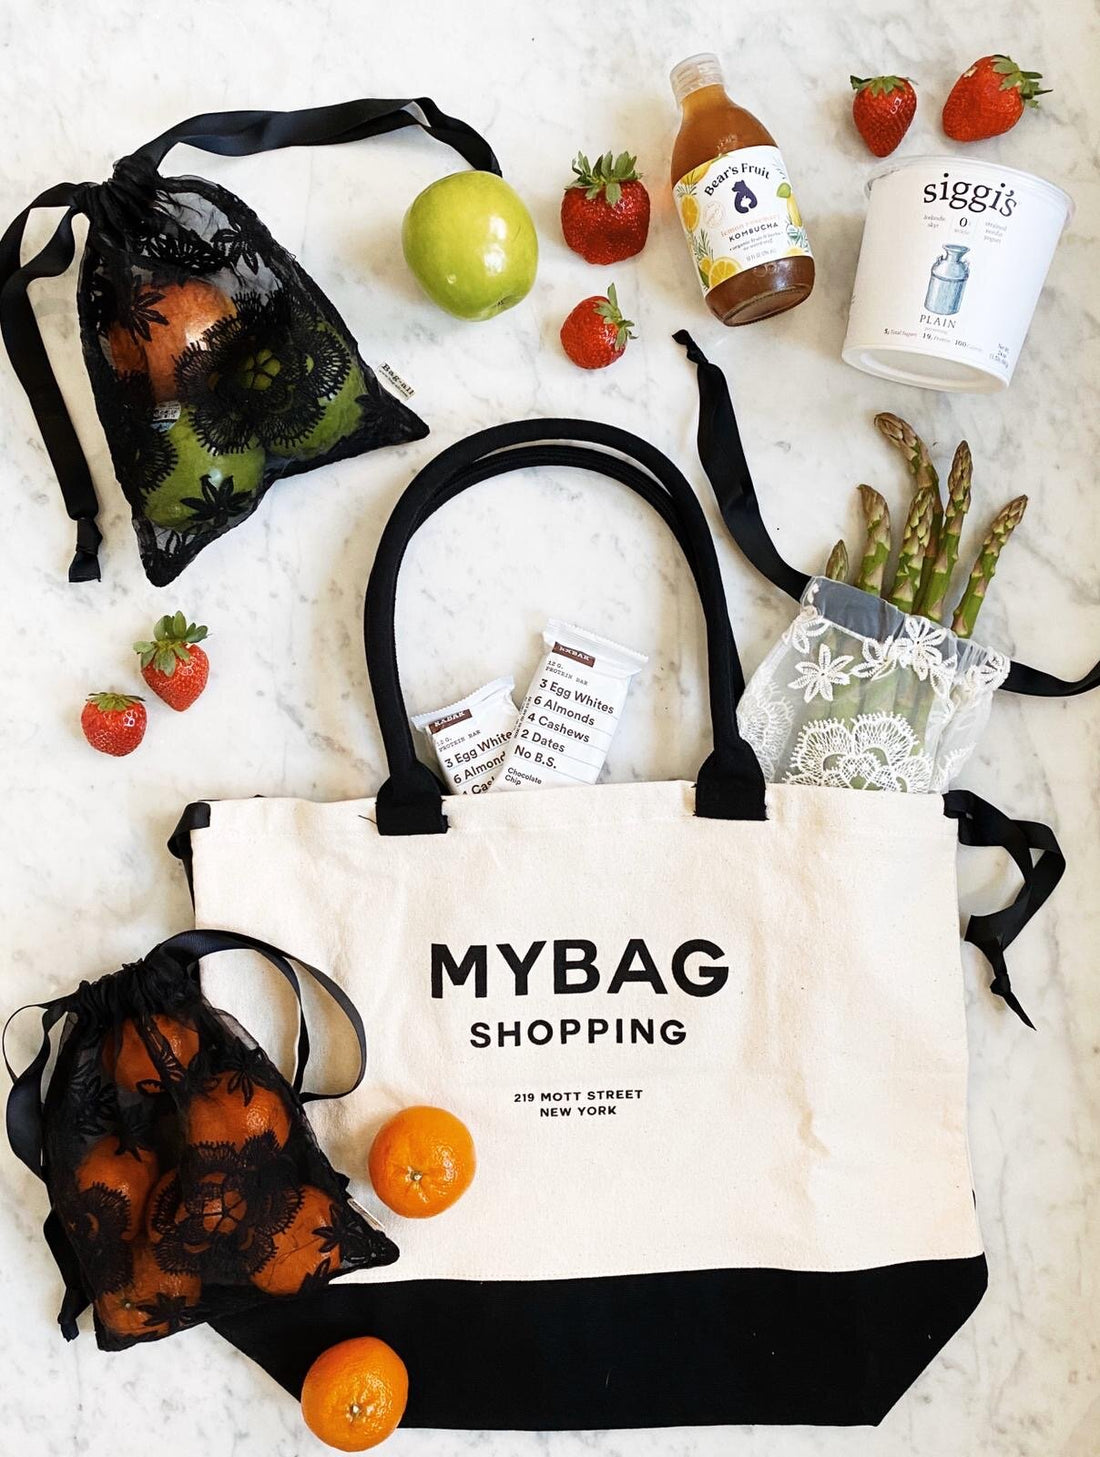 They're Banning Plastic Bags and We're Tote-ally Into it!